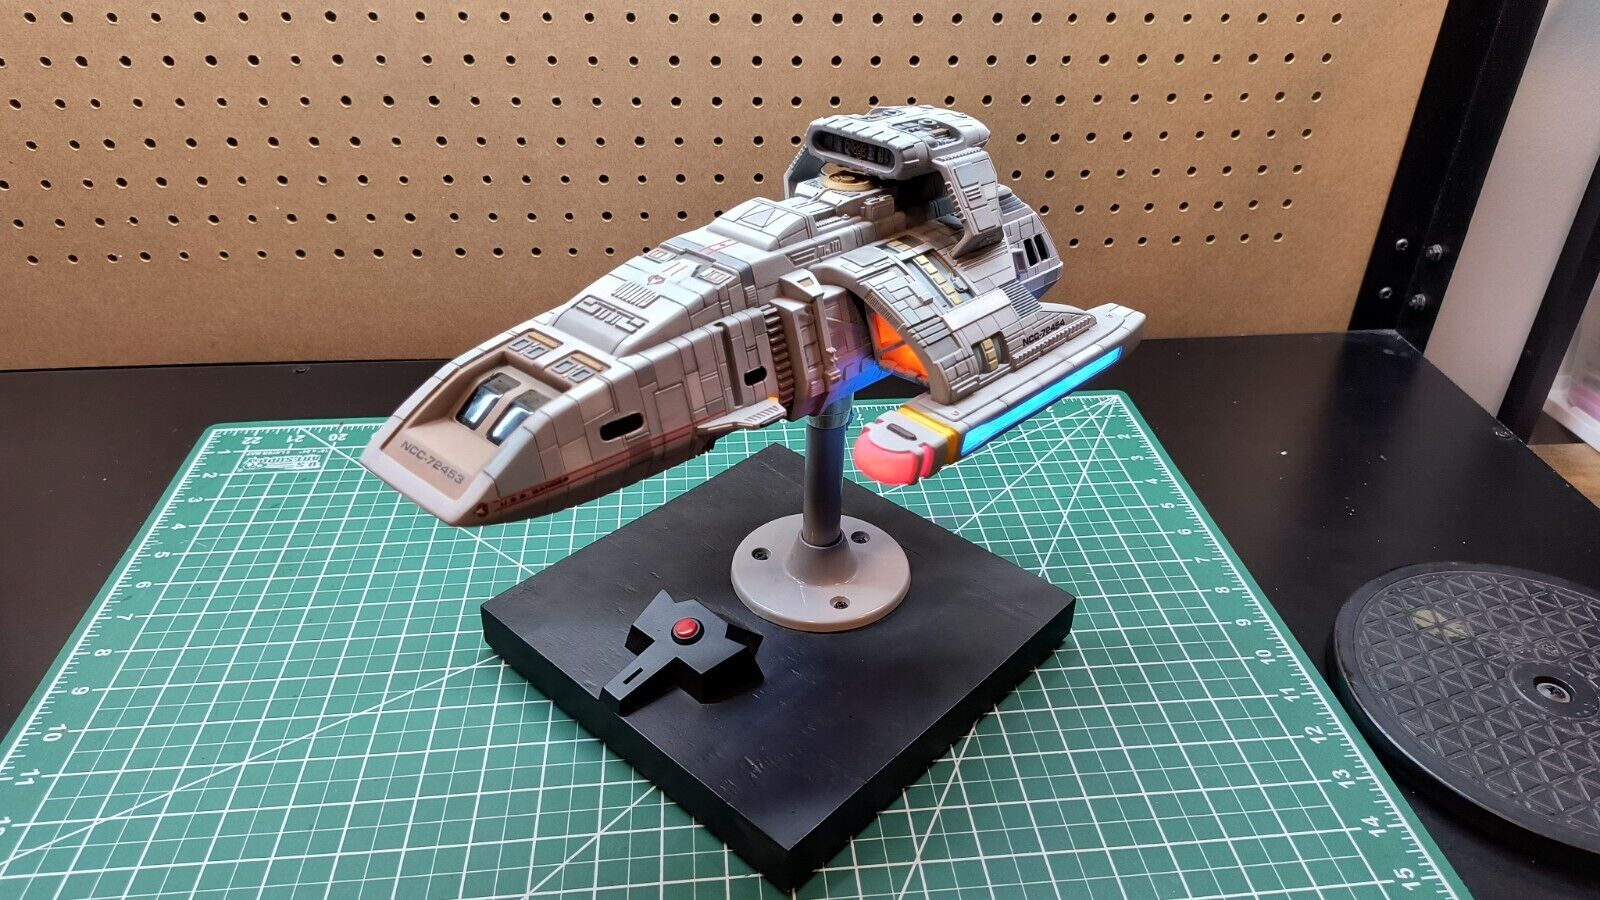 Star Trek Runabout Custom Built Model With Lights And Base. Appr. 13 Inches Long